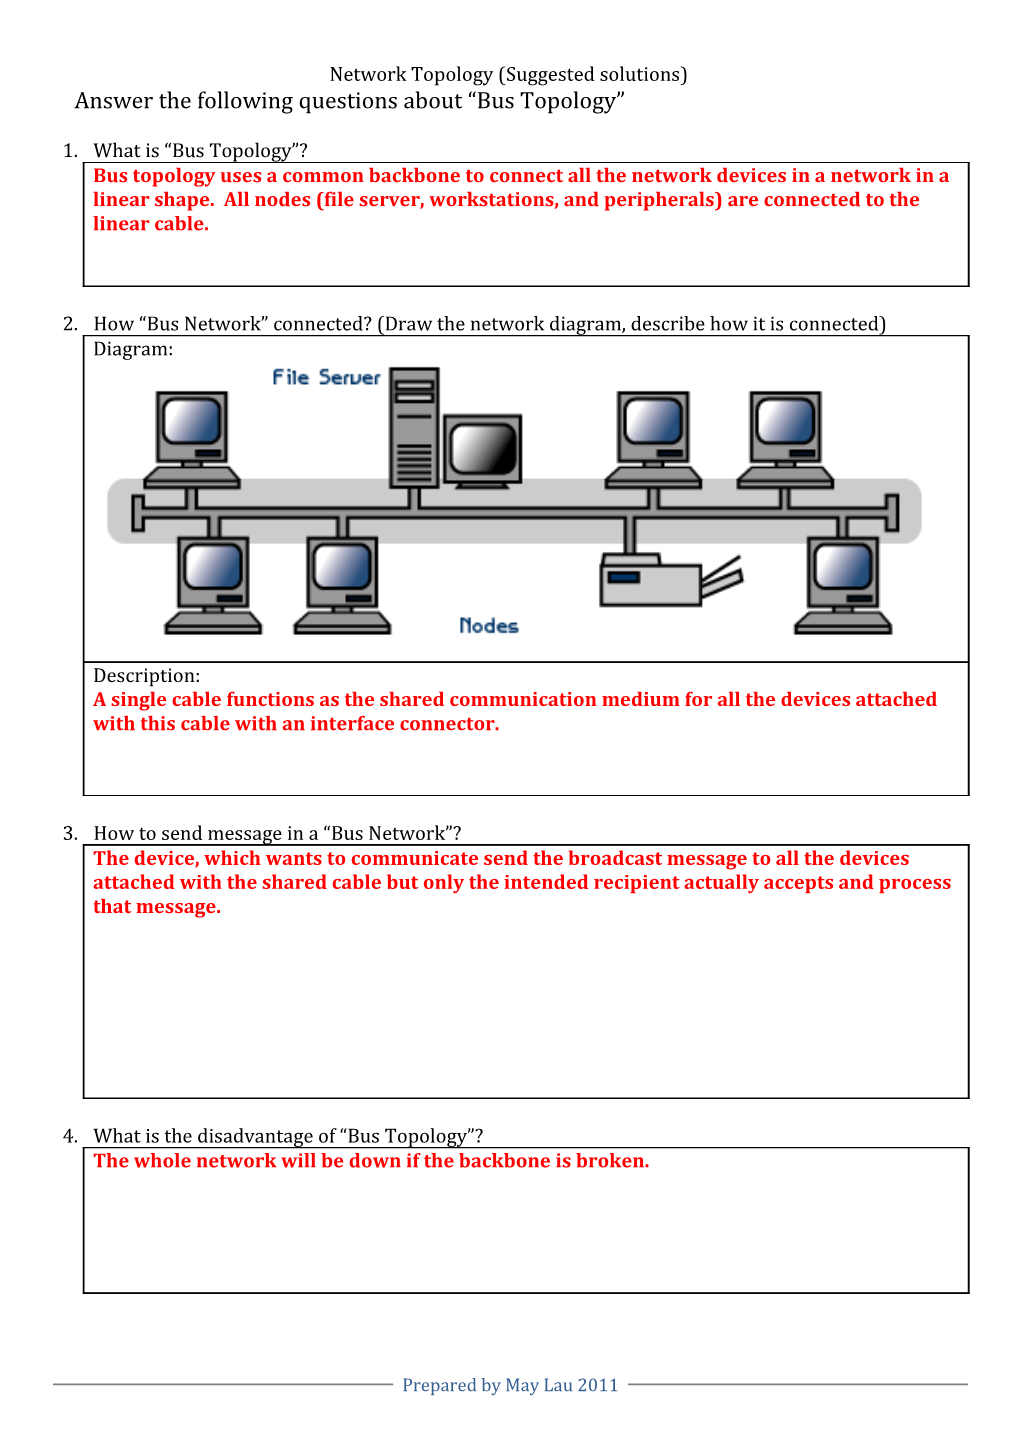 Network Topology (Activity Guideline) Set 1